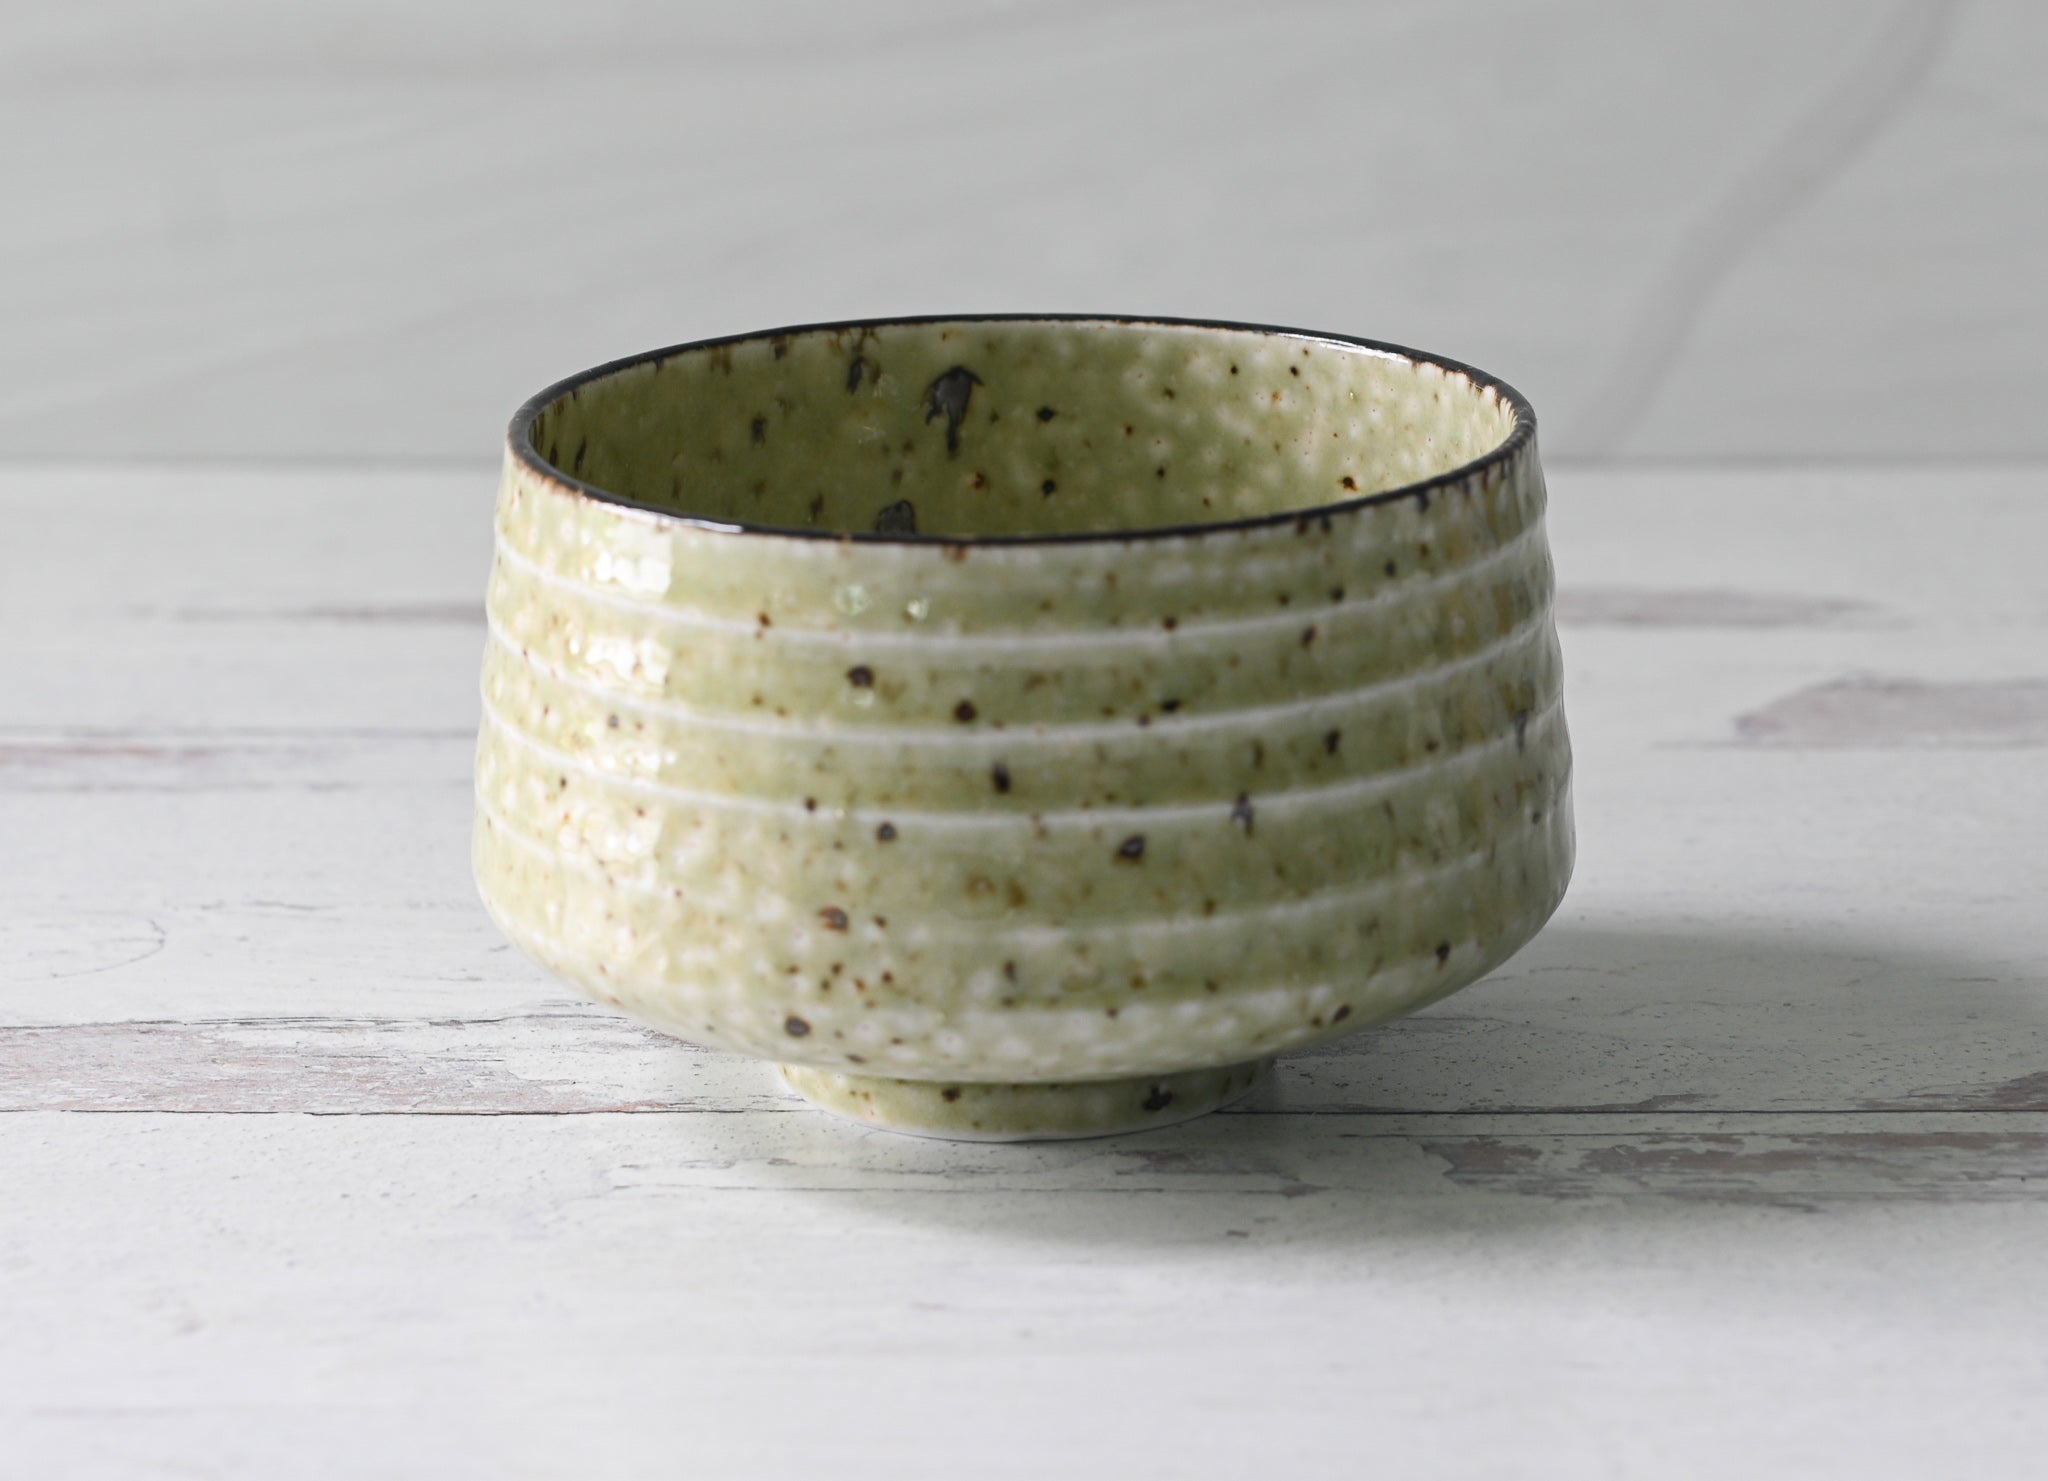 Speckled Ceramic Matcha Bowl With Spout, Pink and White, Matcha